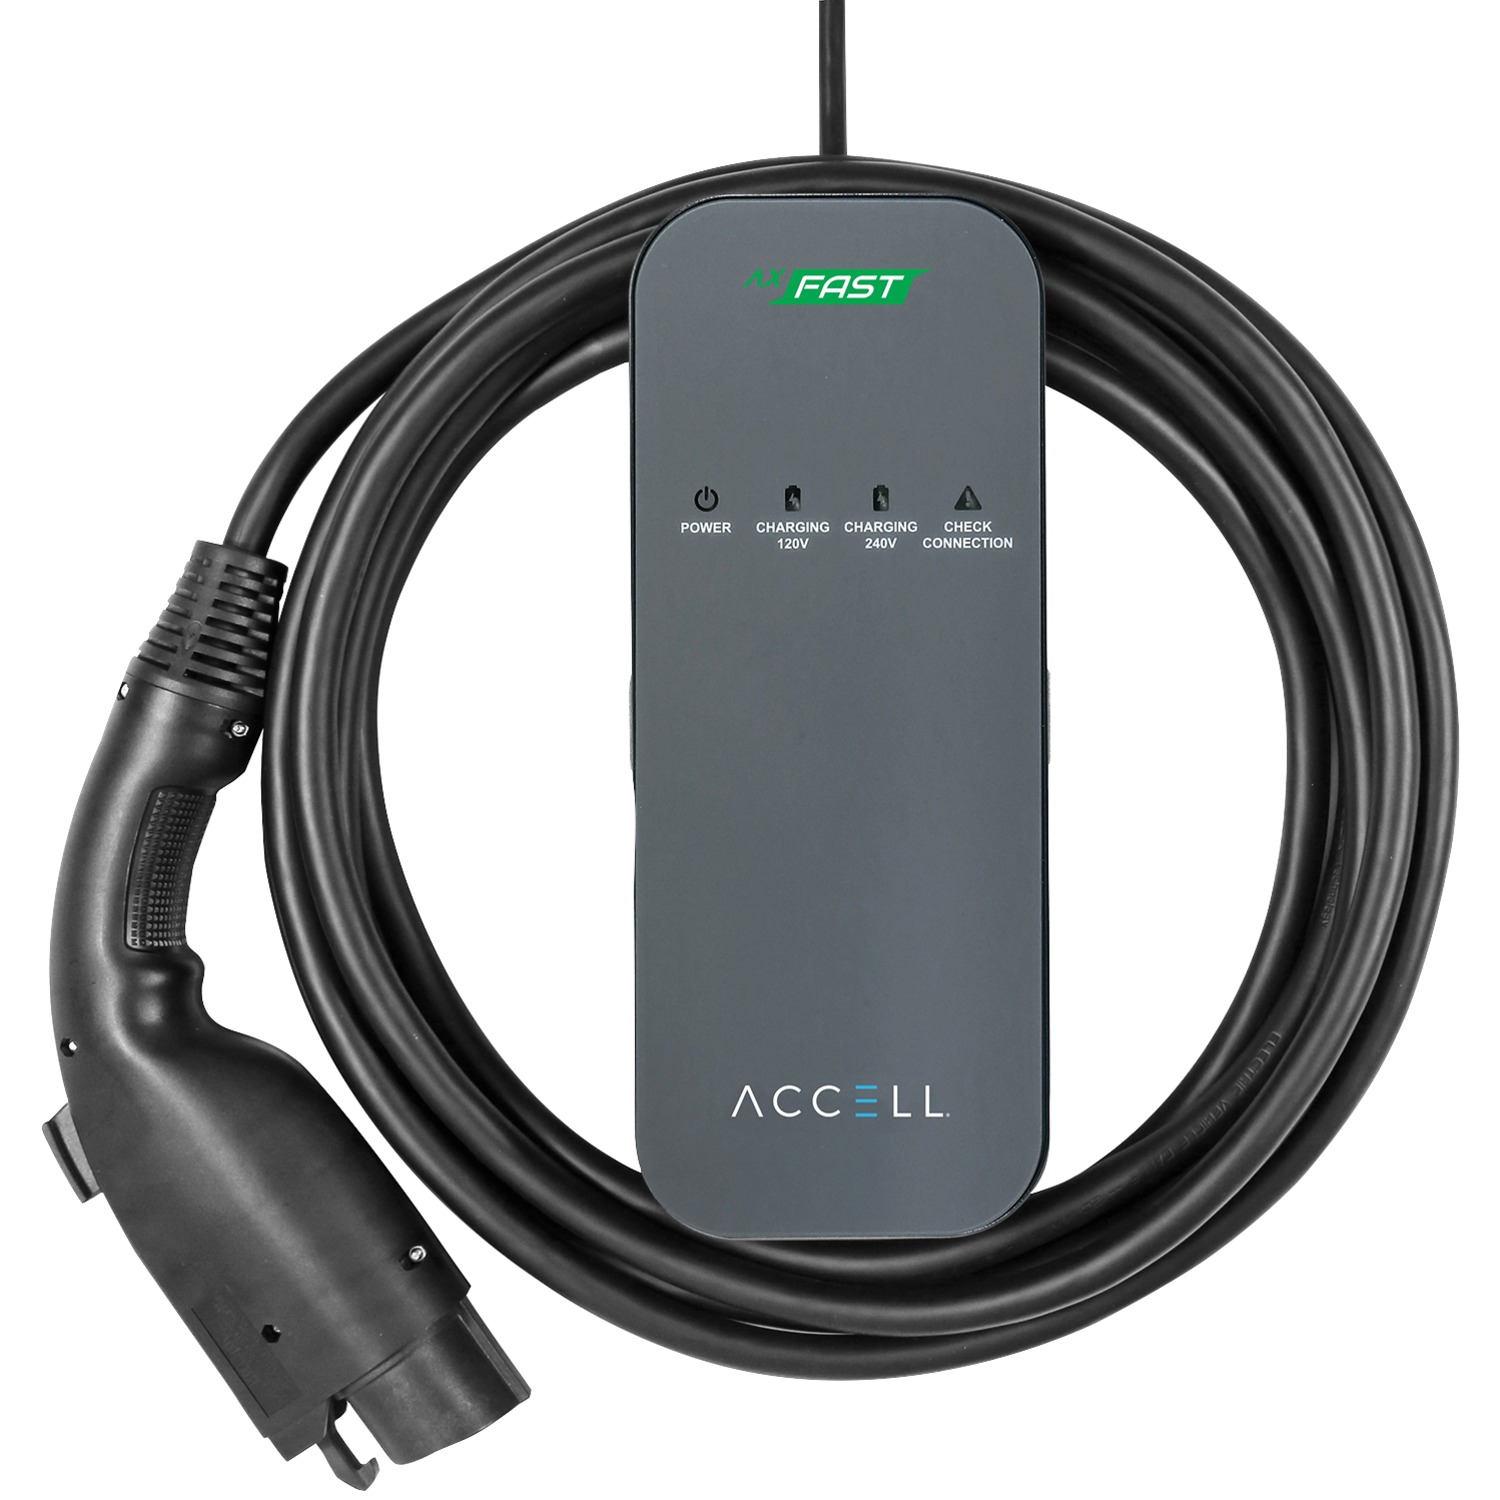 ACCELL P-120240V.USA-001 Dual-Voltage AxFAST Portable Electric Vehicle Charger (EVSE) Level 2 - image 1 of 7